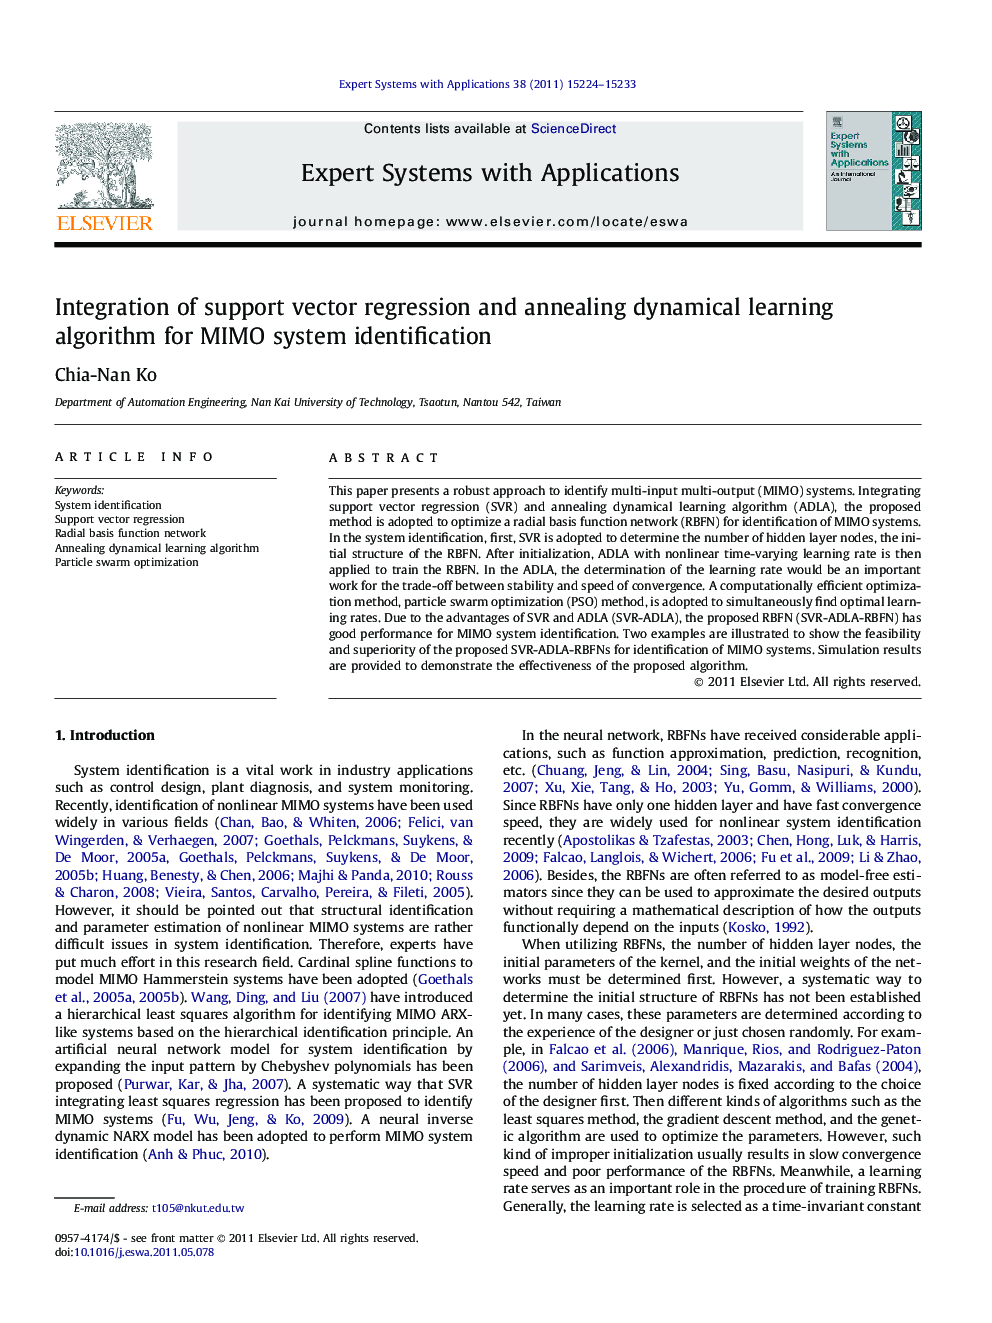 Integration of support vector regression and annealing dynamical learning algorithm for MIMO system identification